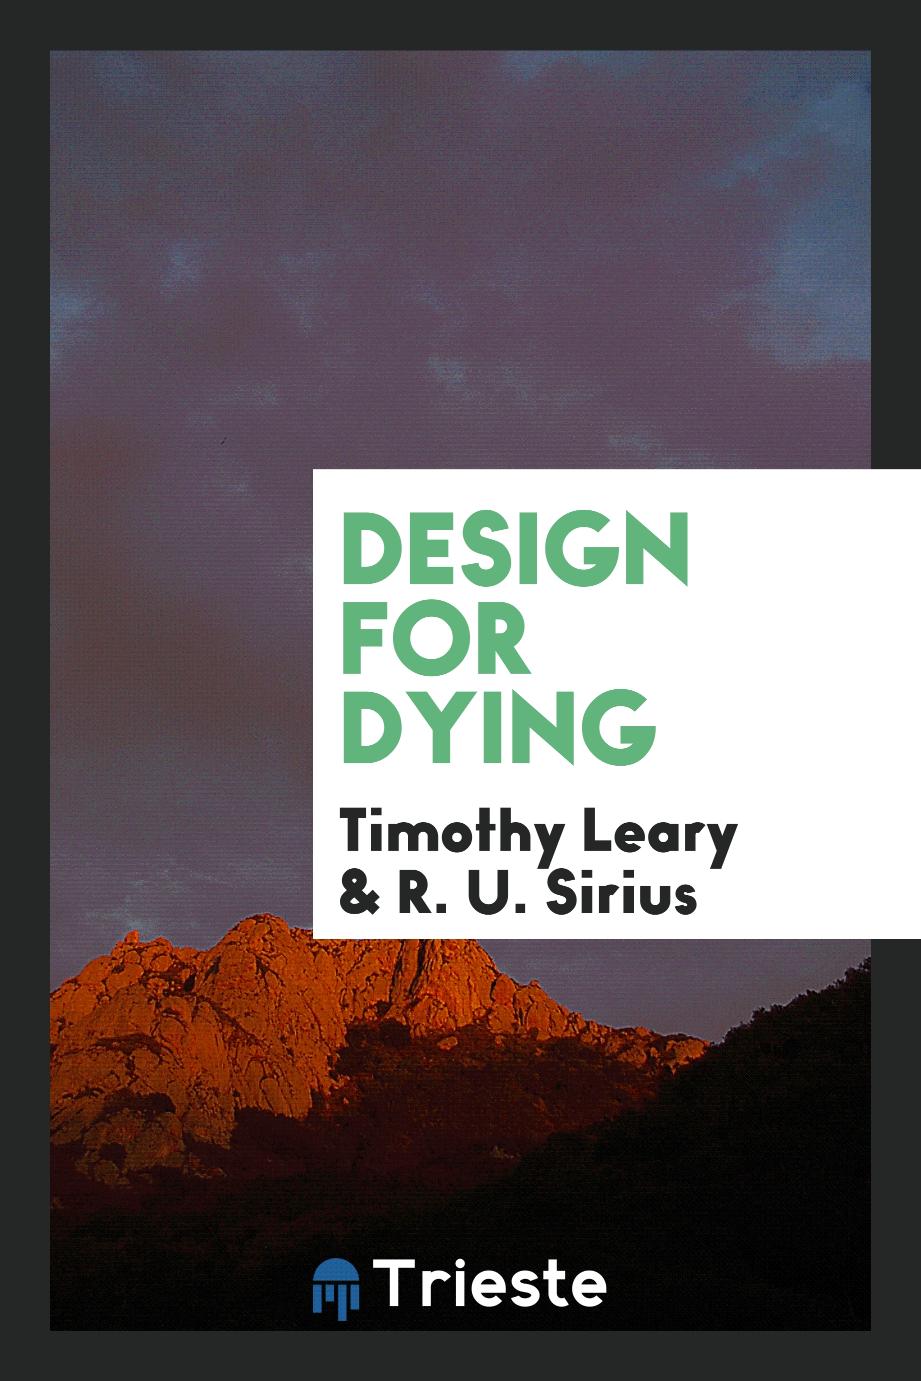 Design for dying